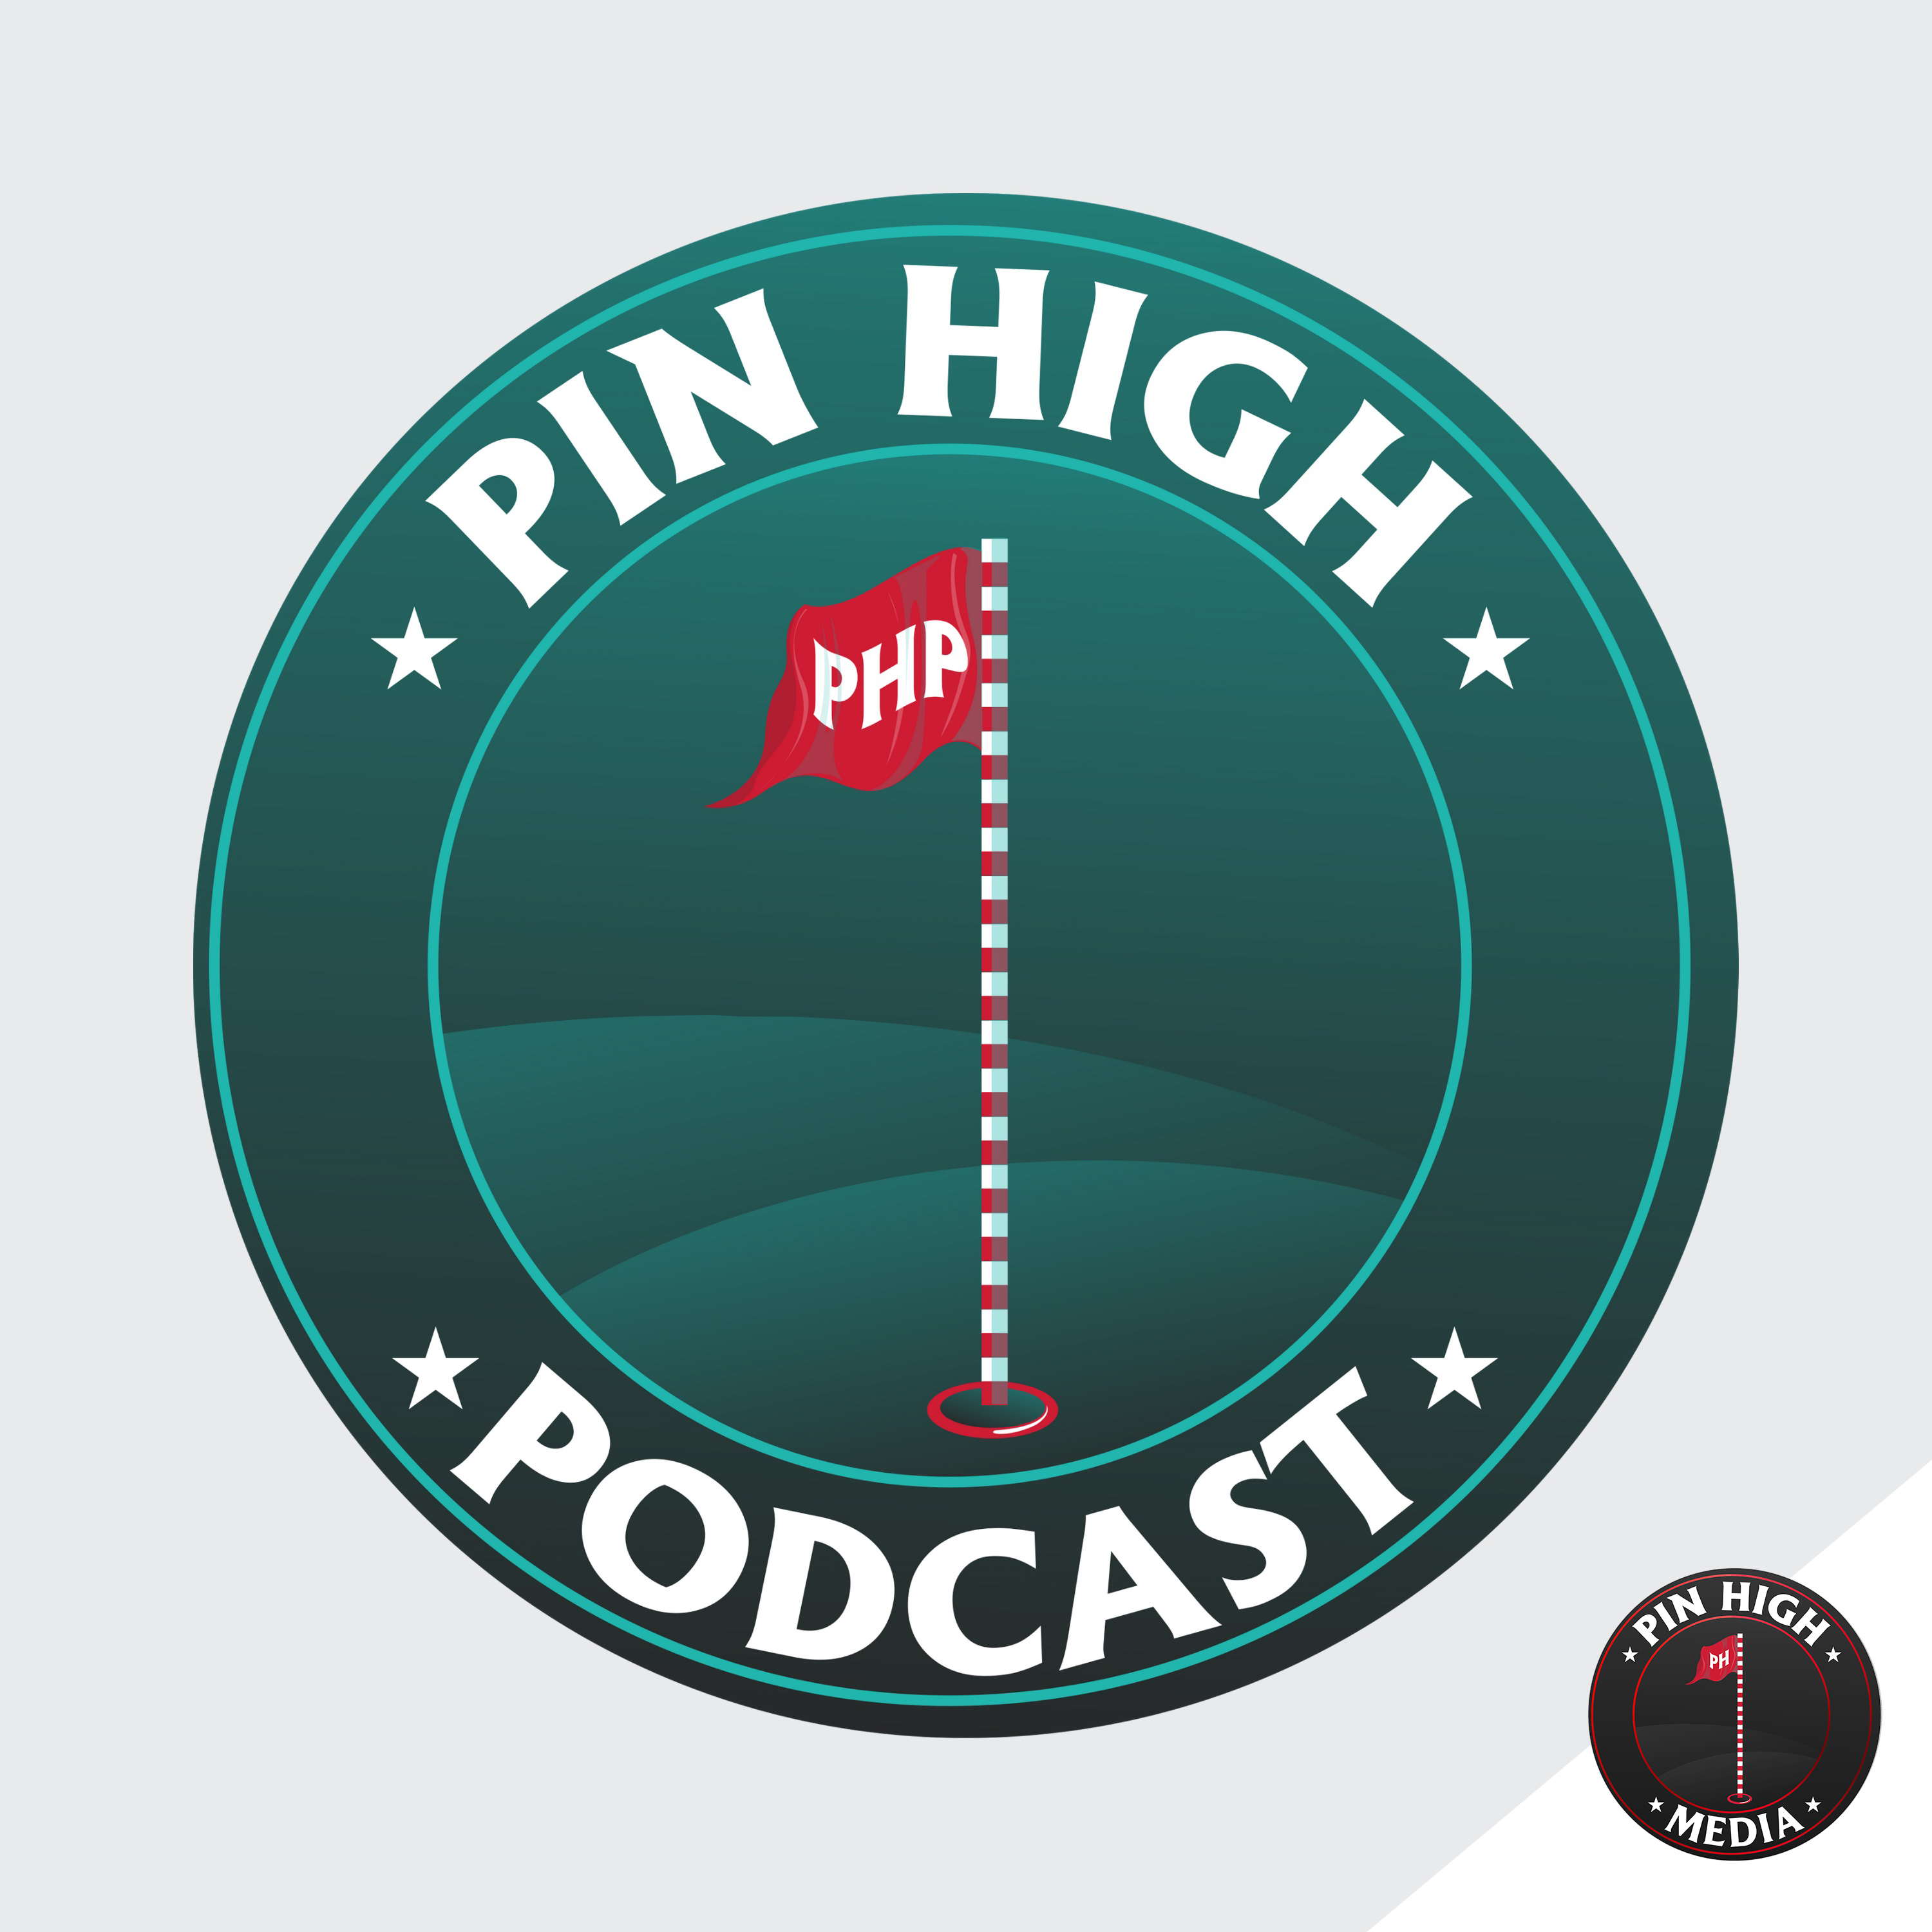 Pin High Podcast Ep. 166: What to Expect From The PGA TOUR Netflix Show